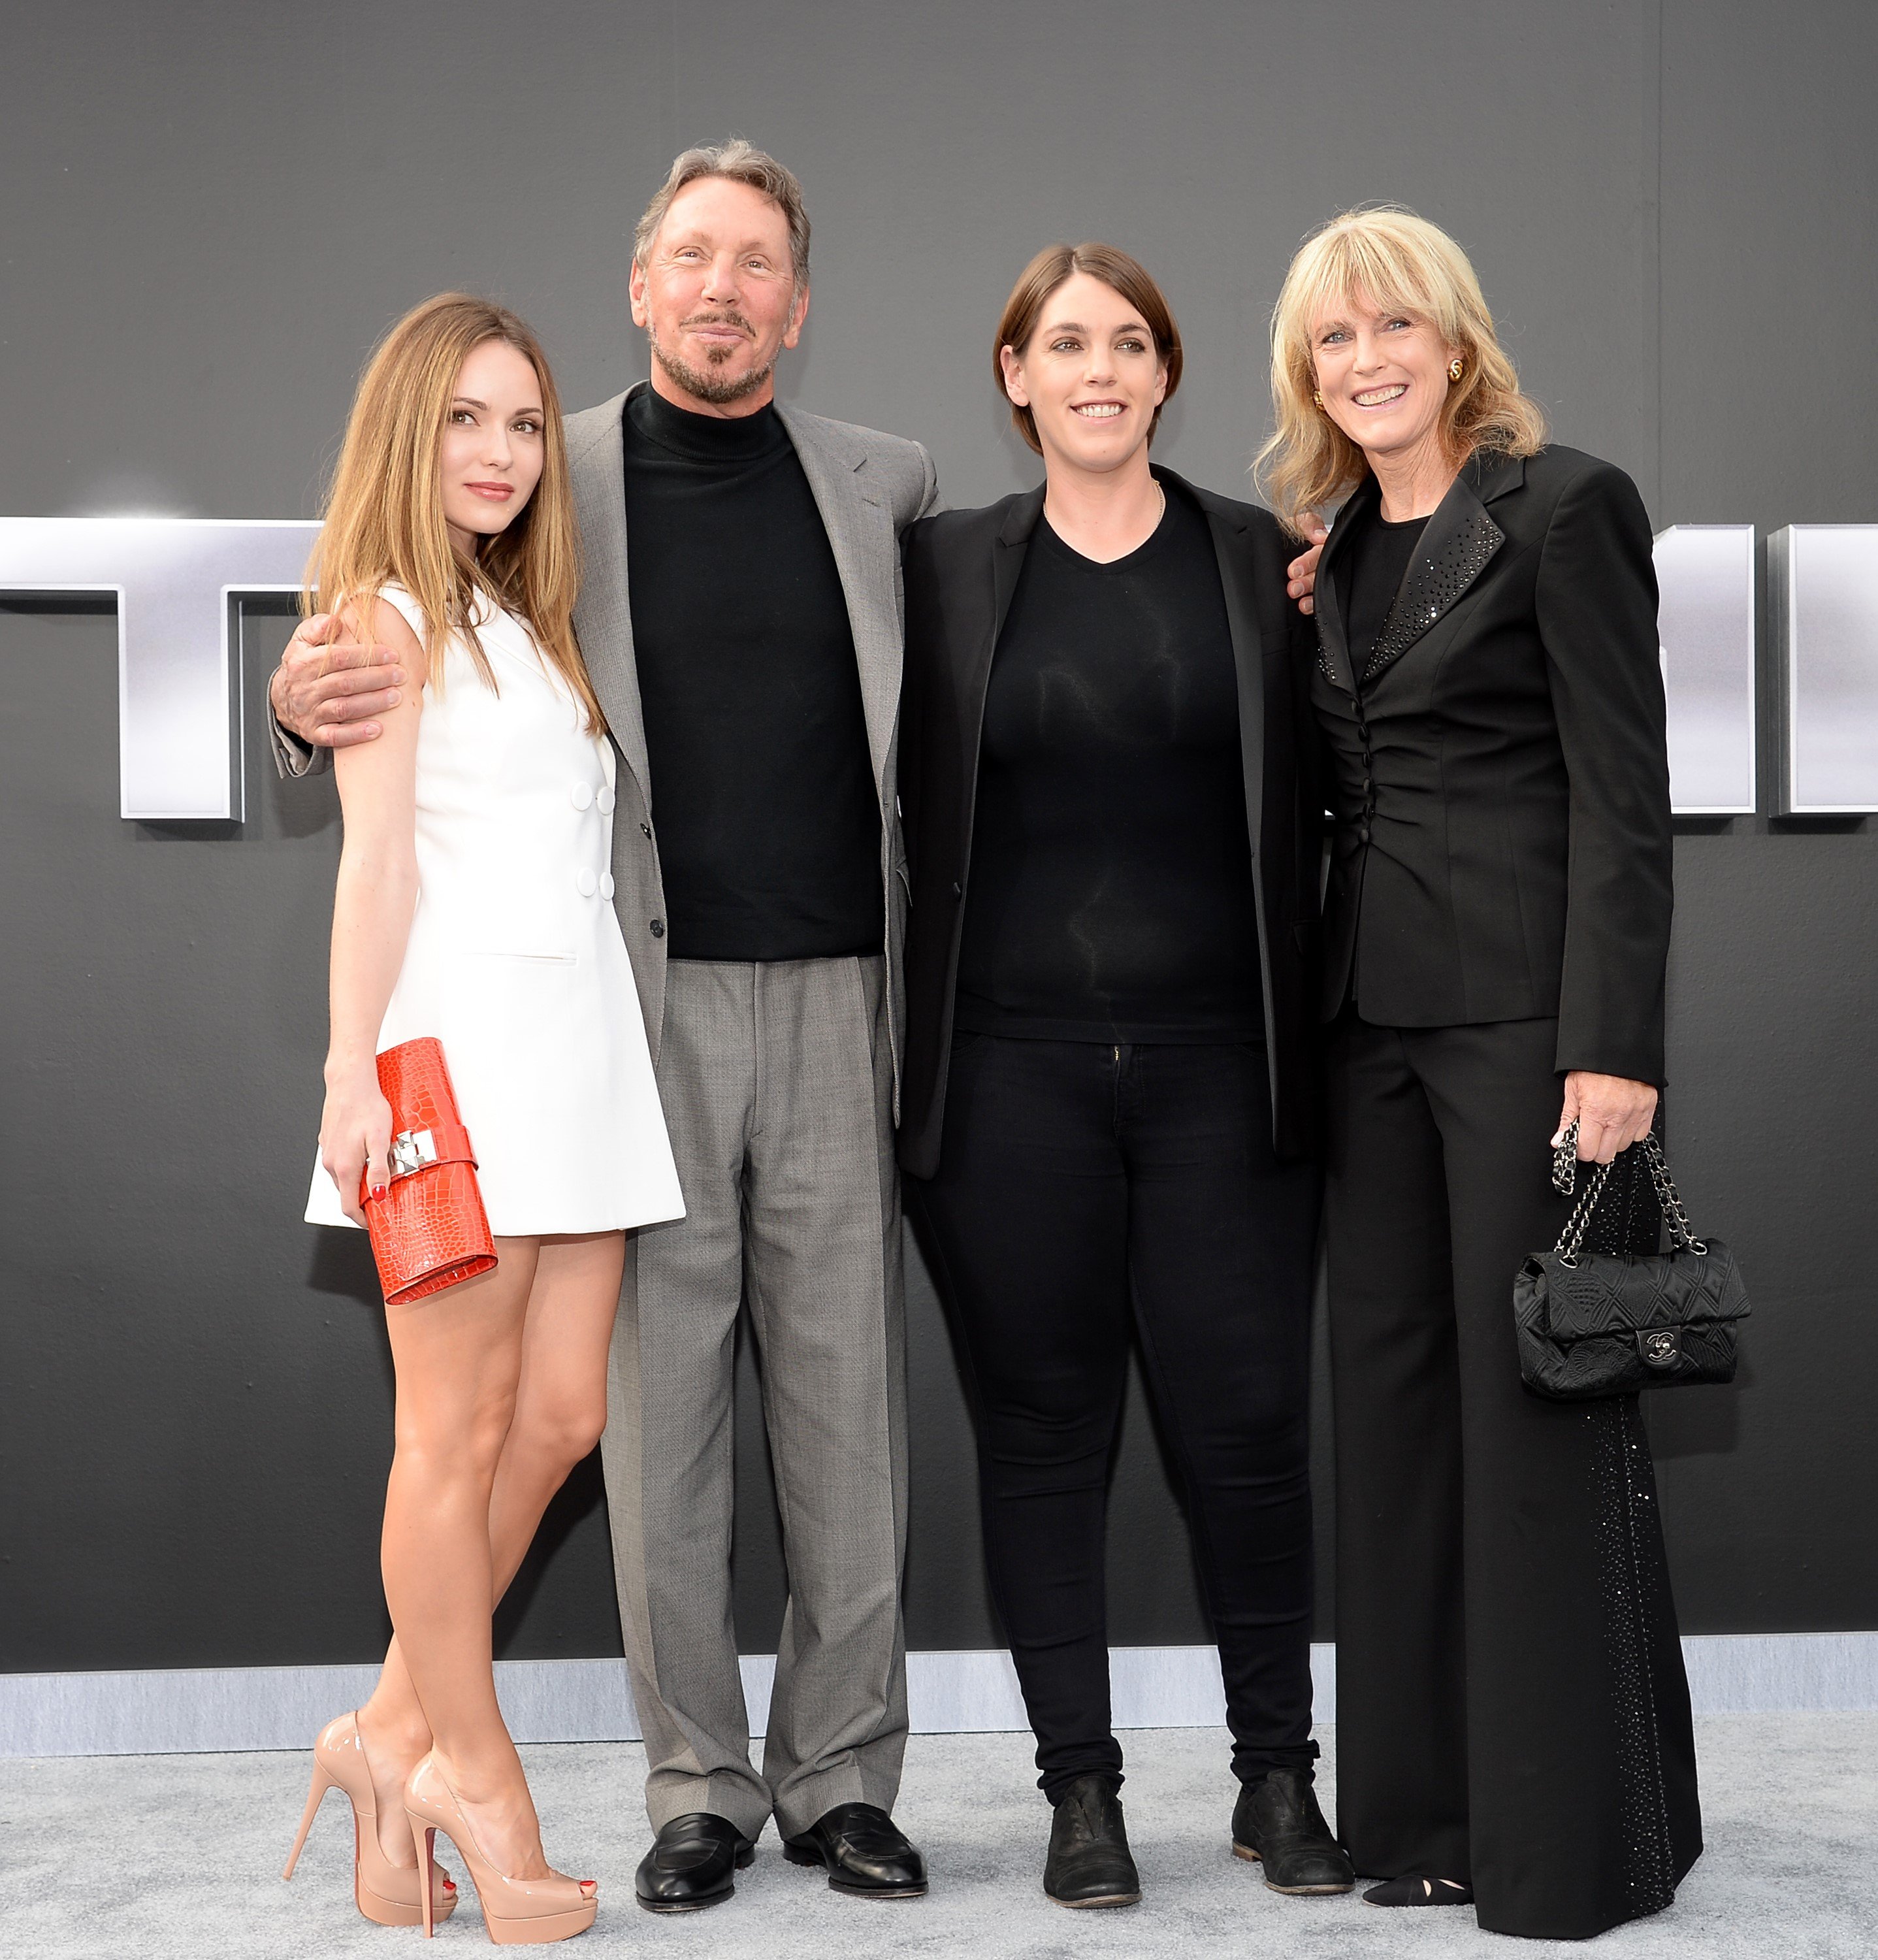 Nikita Kahn, Larry Ellison, Megan Ellison and Barbara Boothe arrive at the premiere of Paramount Pictures' "Terminator Genisys" at Dolby Theatre on June 28, 2015 in Hollywood, California | Source: Getty Images